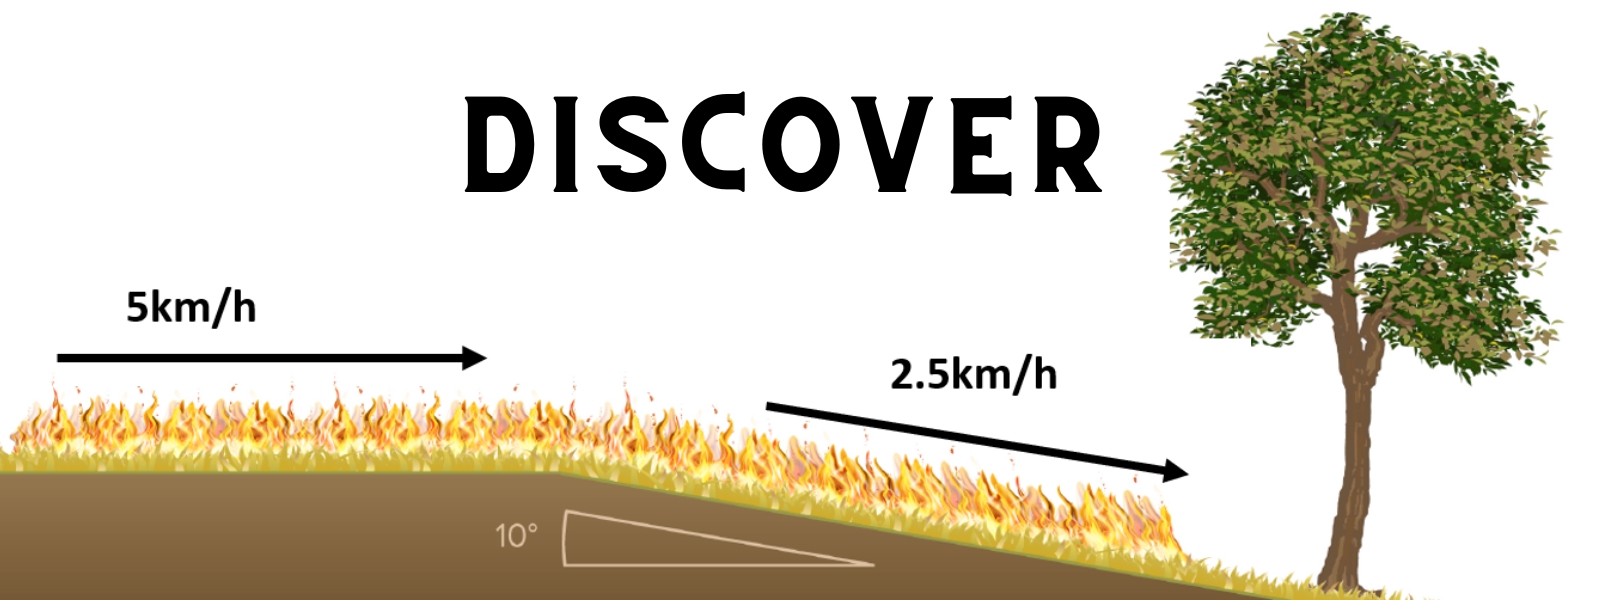 Discover Banner